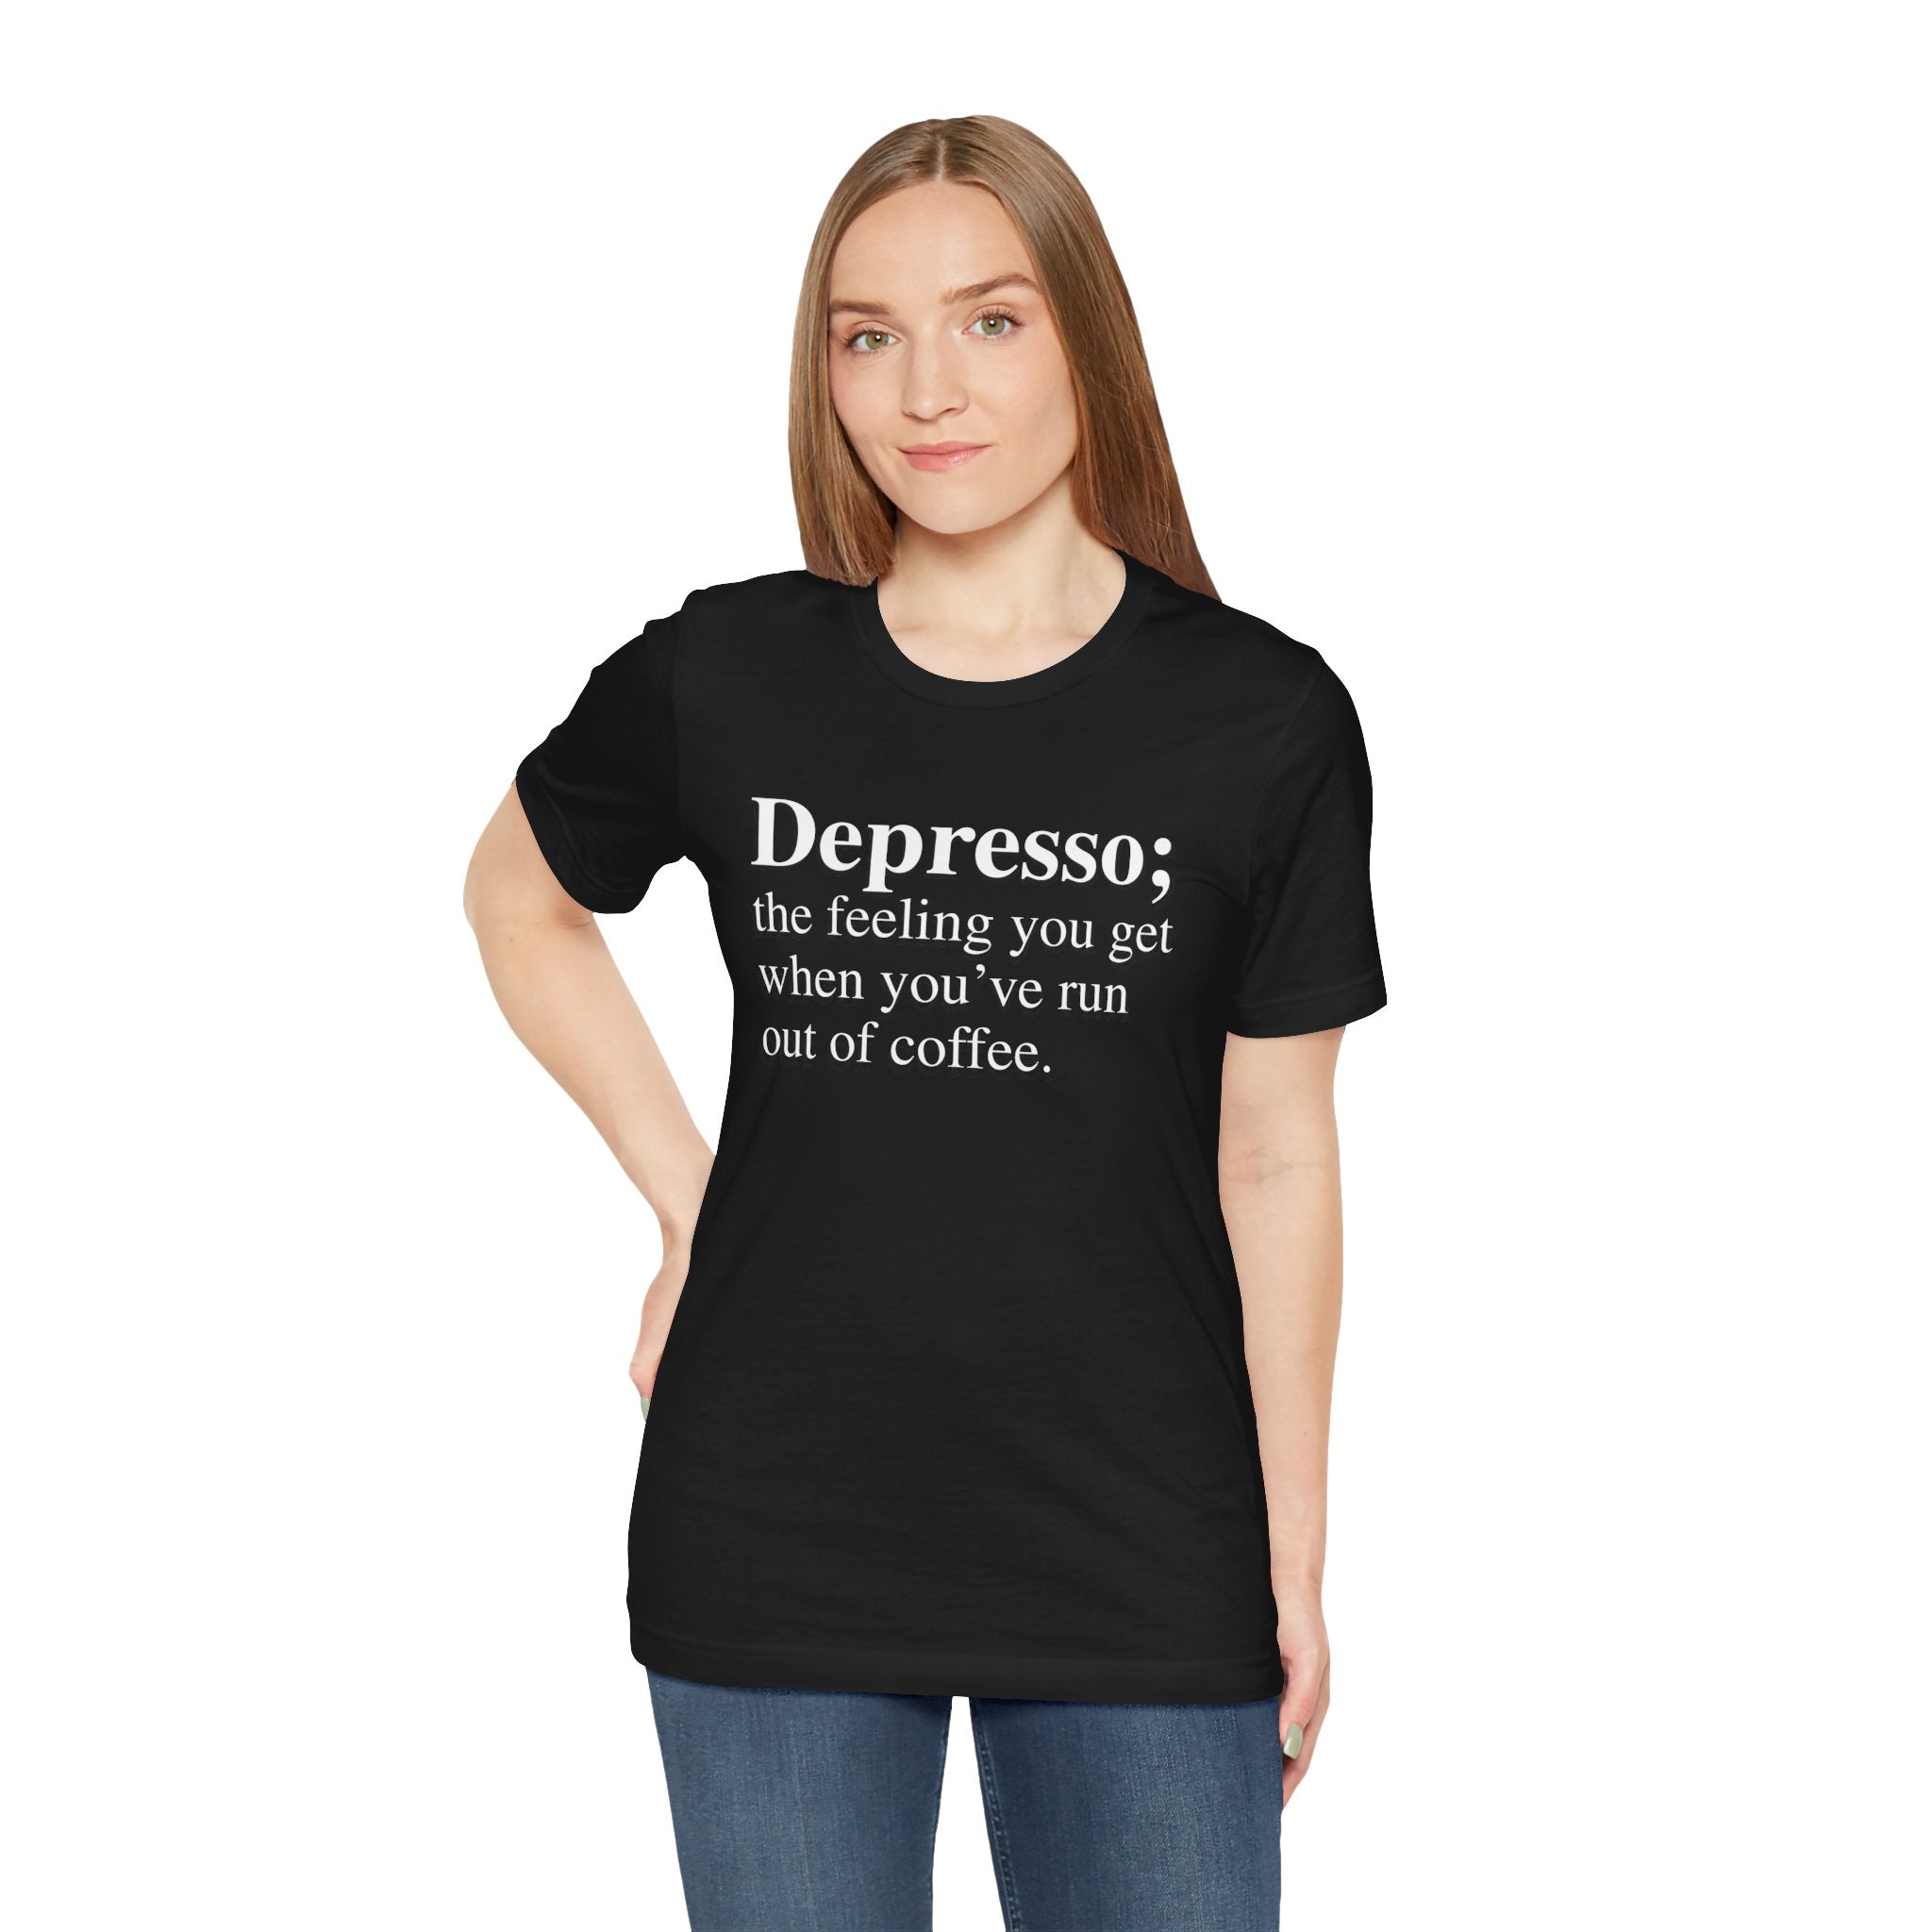 A young woman wearing a soft cotton, black Depresso T-shirt with the text "Depresso; the feeling you get when you’ve run out of coffee.